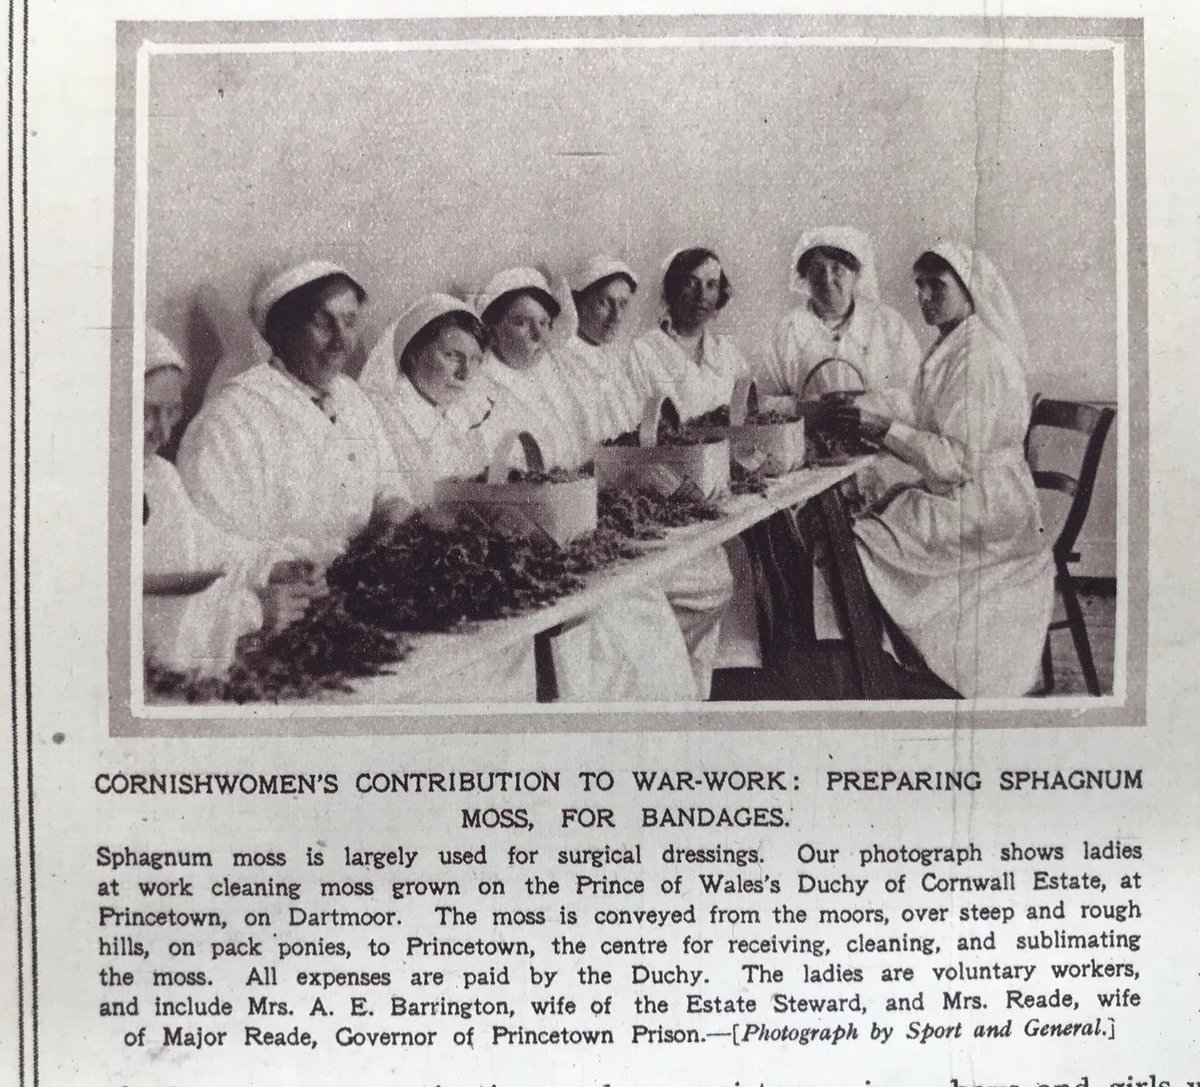 The wonders of sphagnum moss - Cornish moss prepared for bandages during the Great War
The Illustrated War News, June 20, 1917
#WorldPeatlandsDay